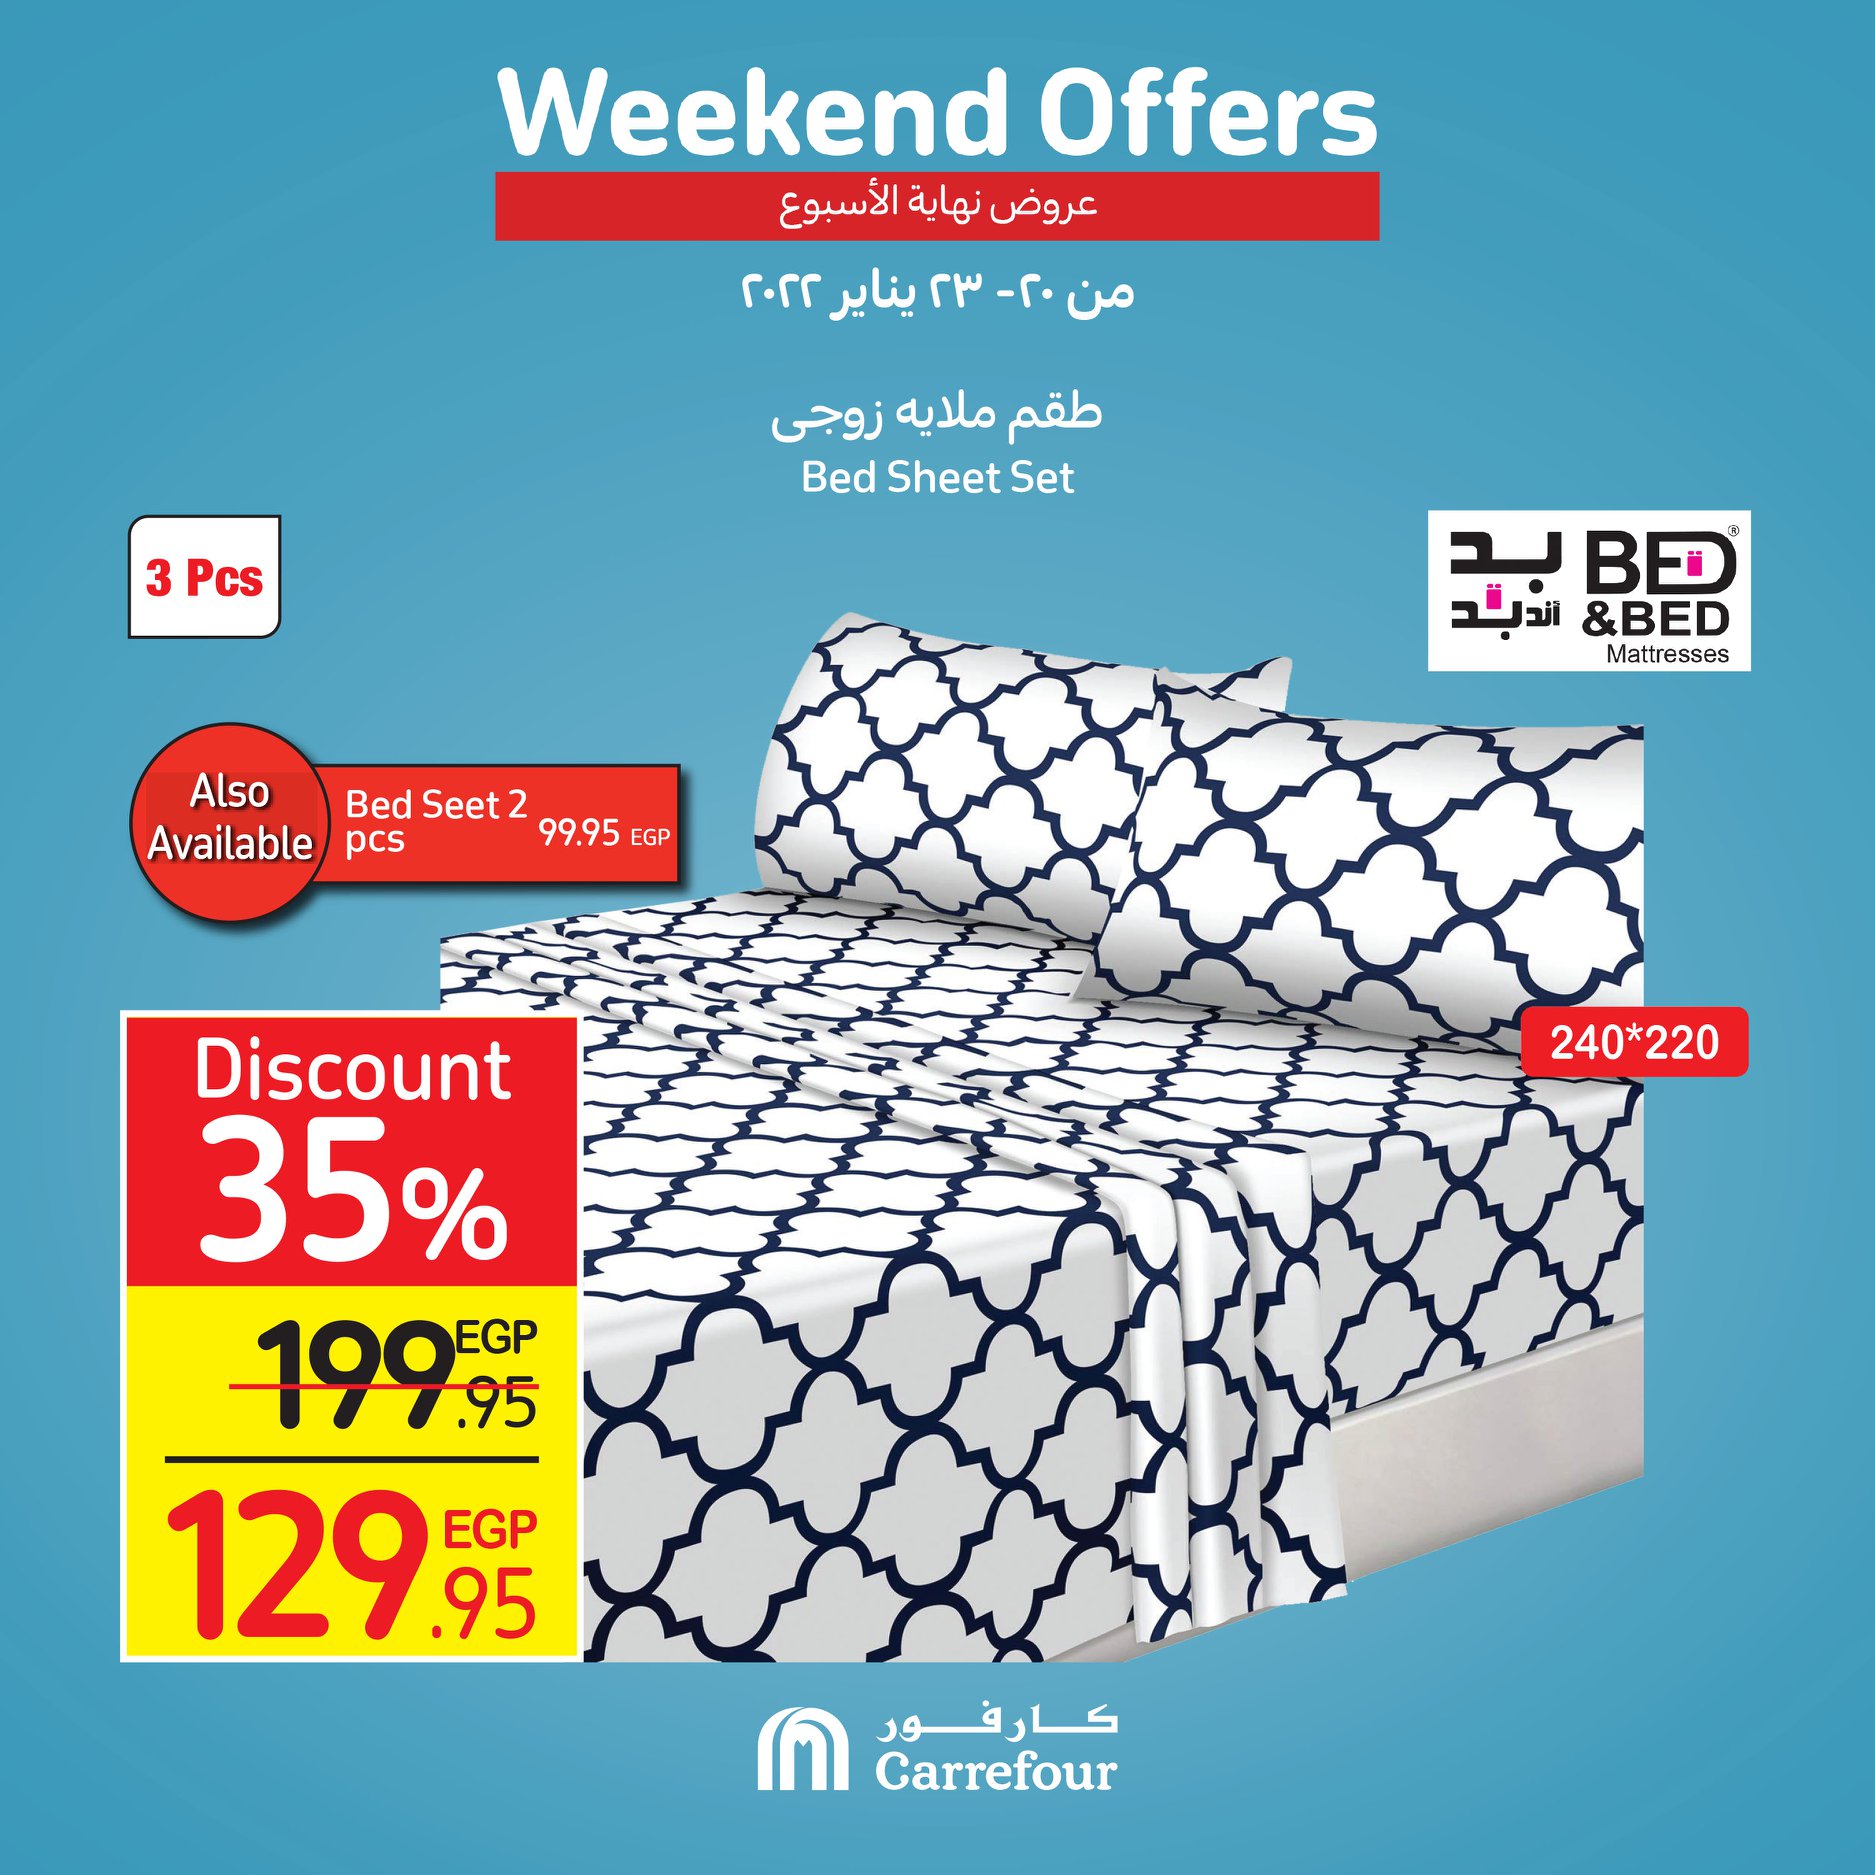 Watch Carrefour's gifts and surprises at Weekend and dirt cheap prices 33